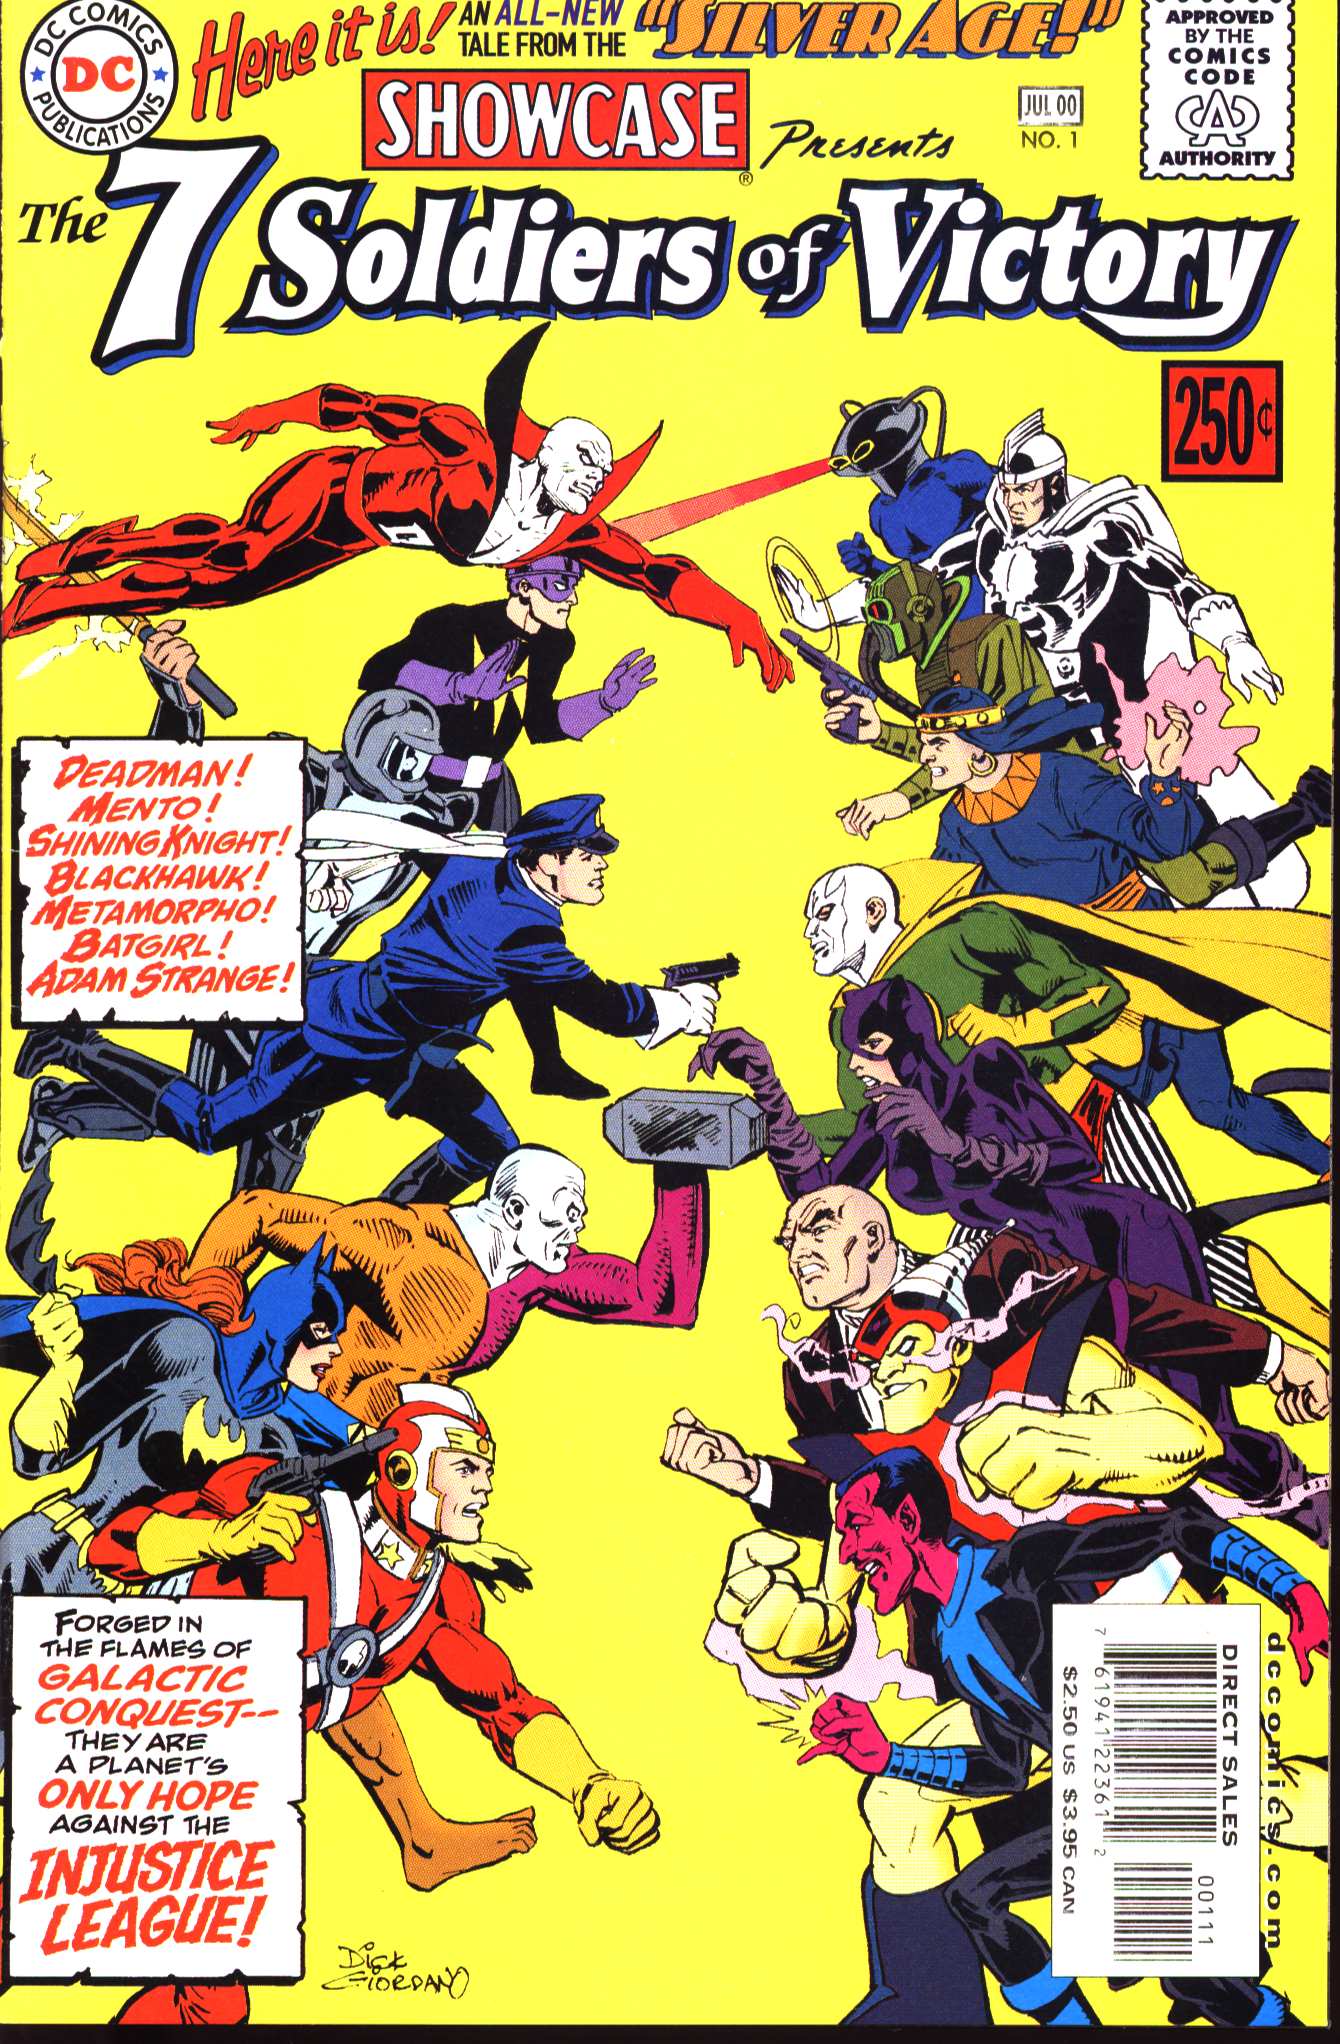 Read online Silver Age: Showcase comic -  Issue # Full - 1